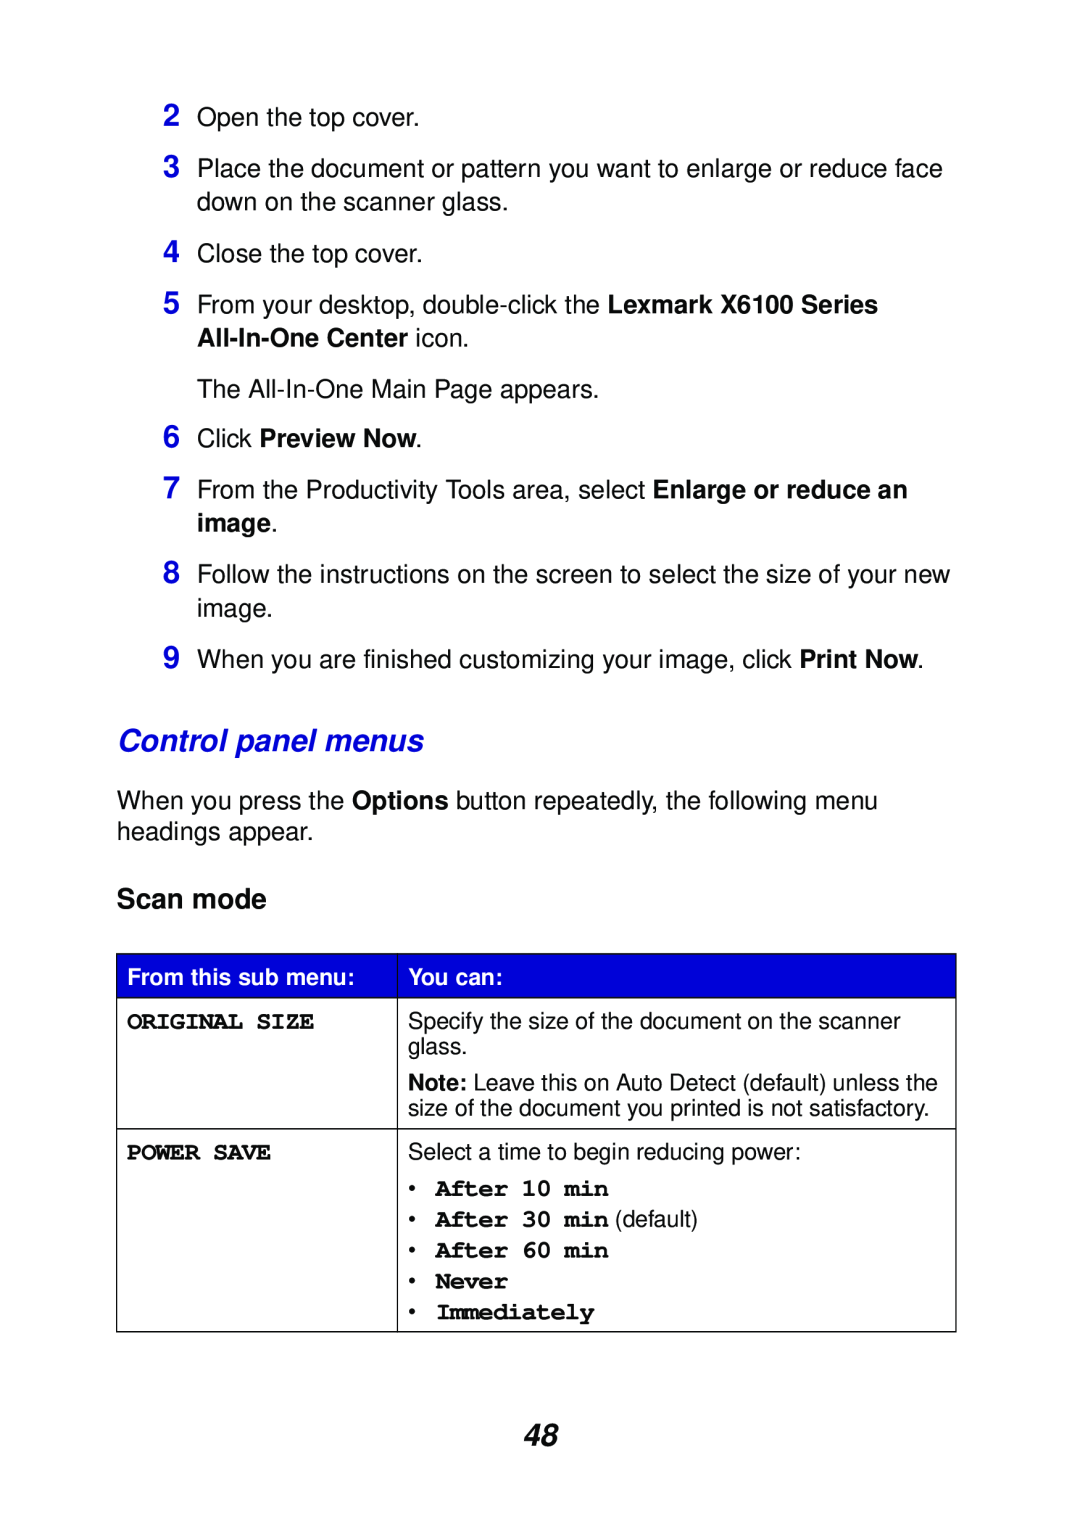 Lexmark X6100 manual Scan mode, From this sub menu, You can 